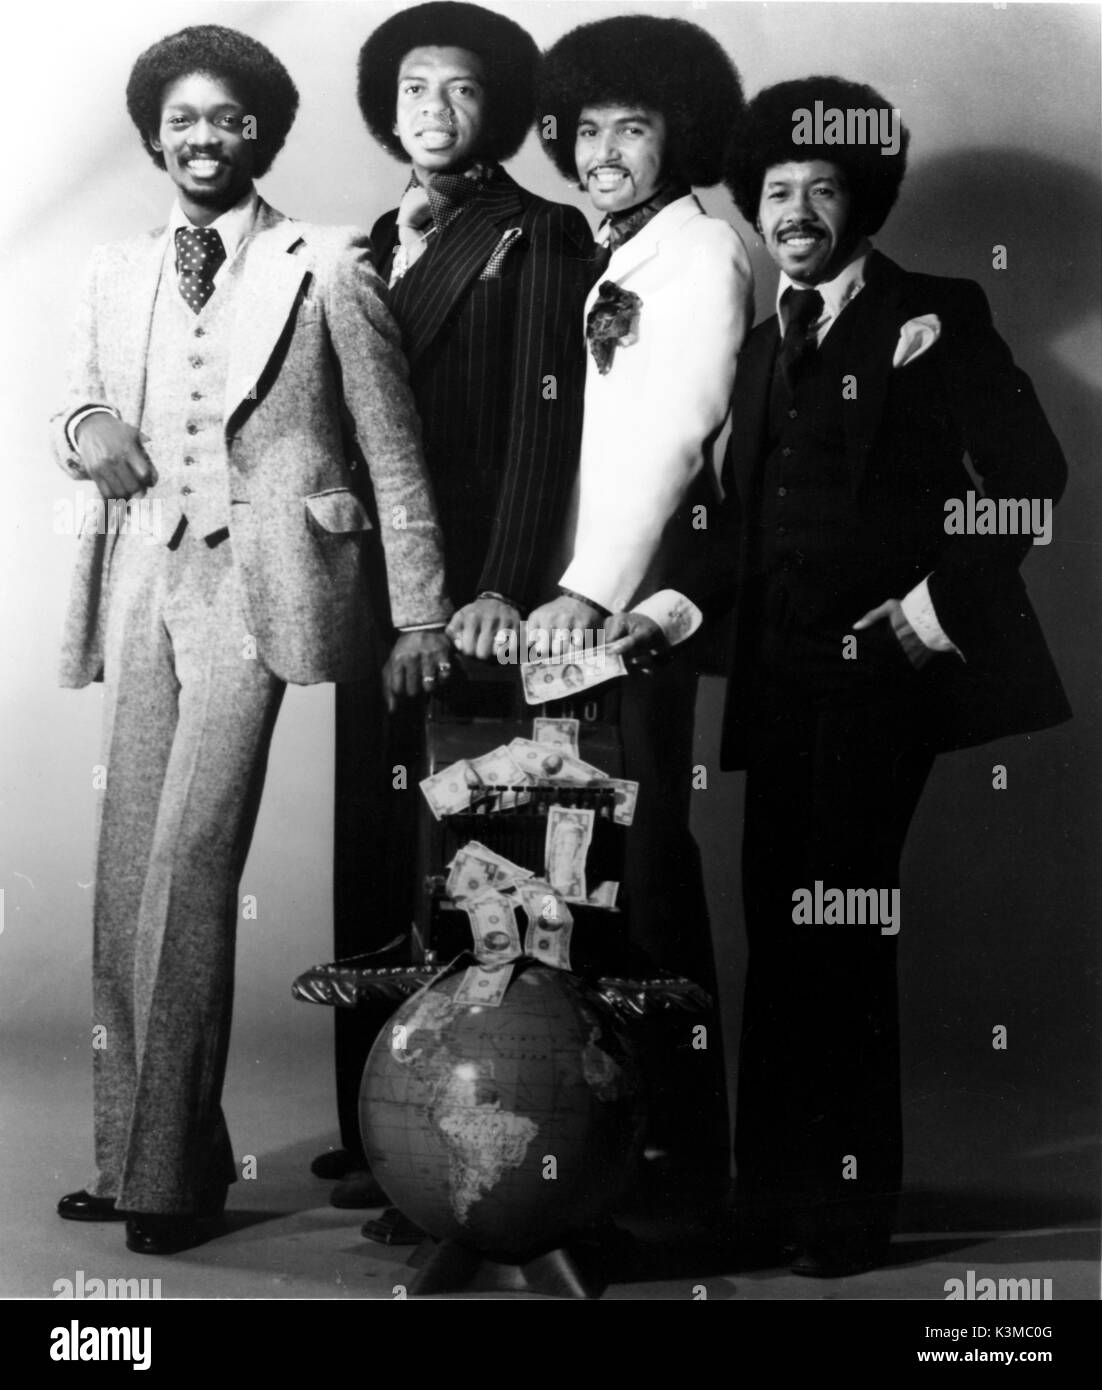 THE CHI-LITES Chicago based 1970s soul group Stock Photo